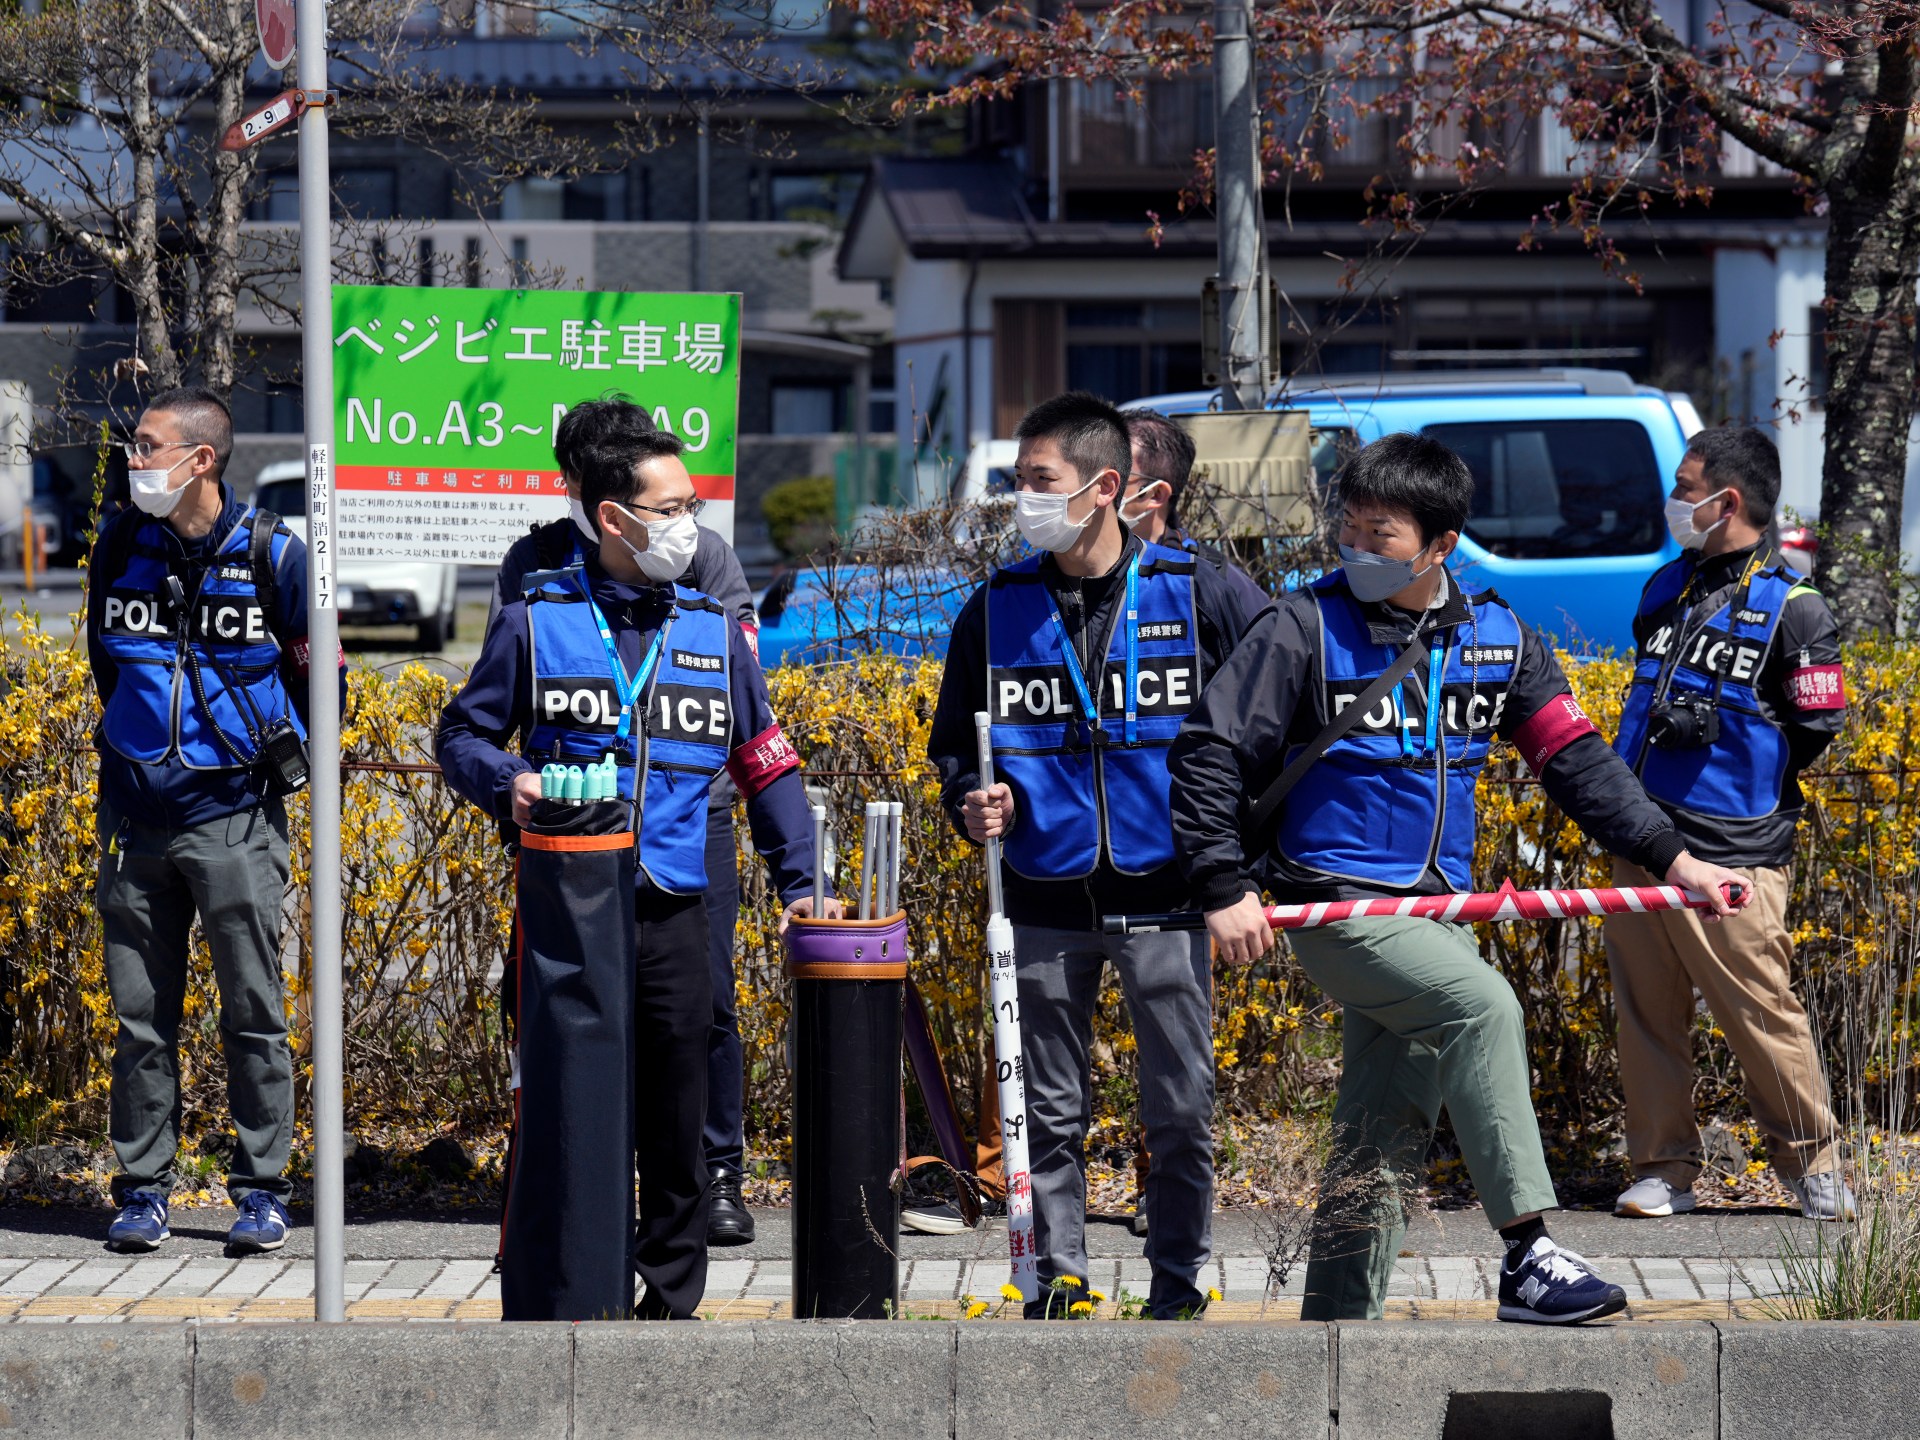 Deadly stabbing and shooting attack in Japan